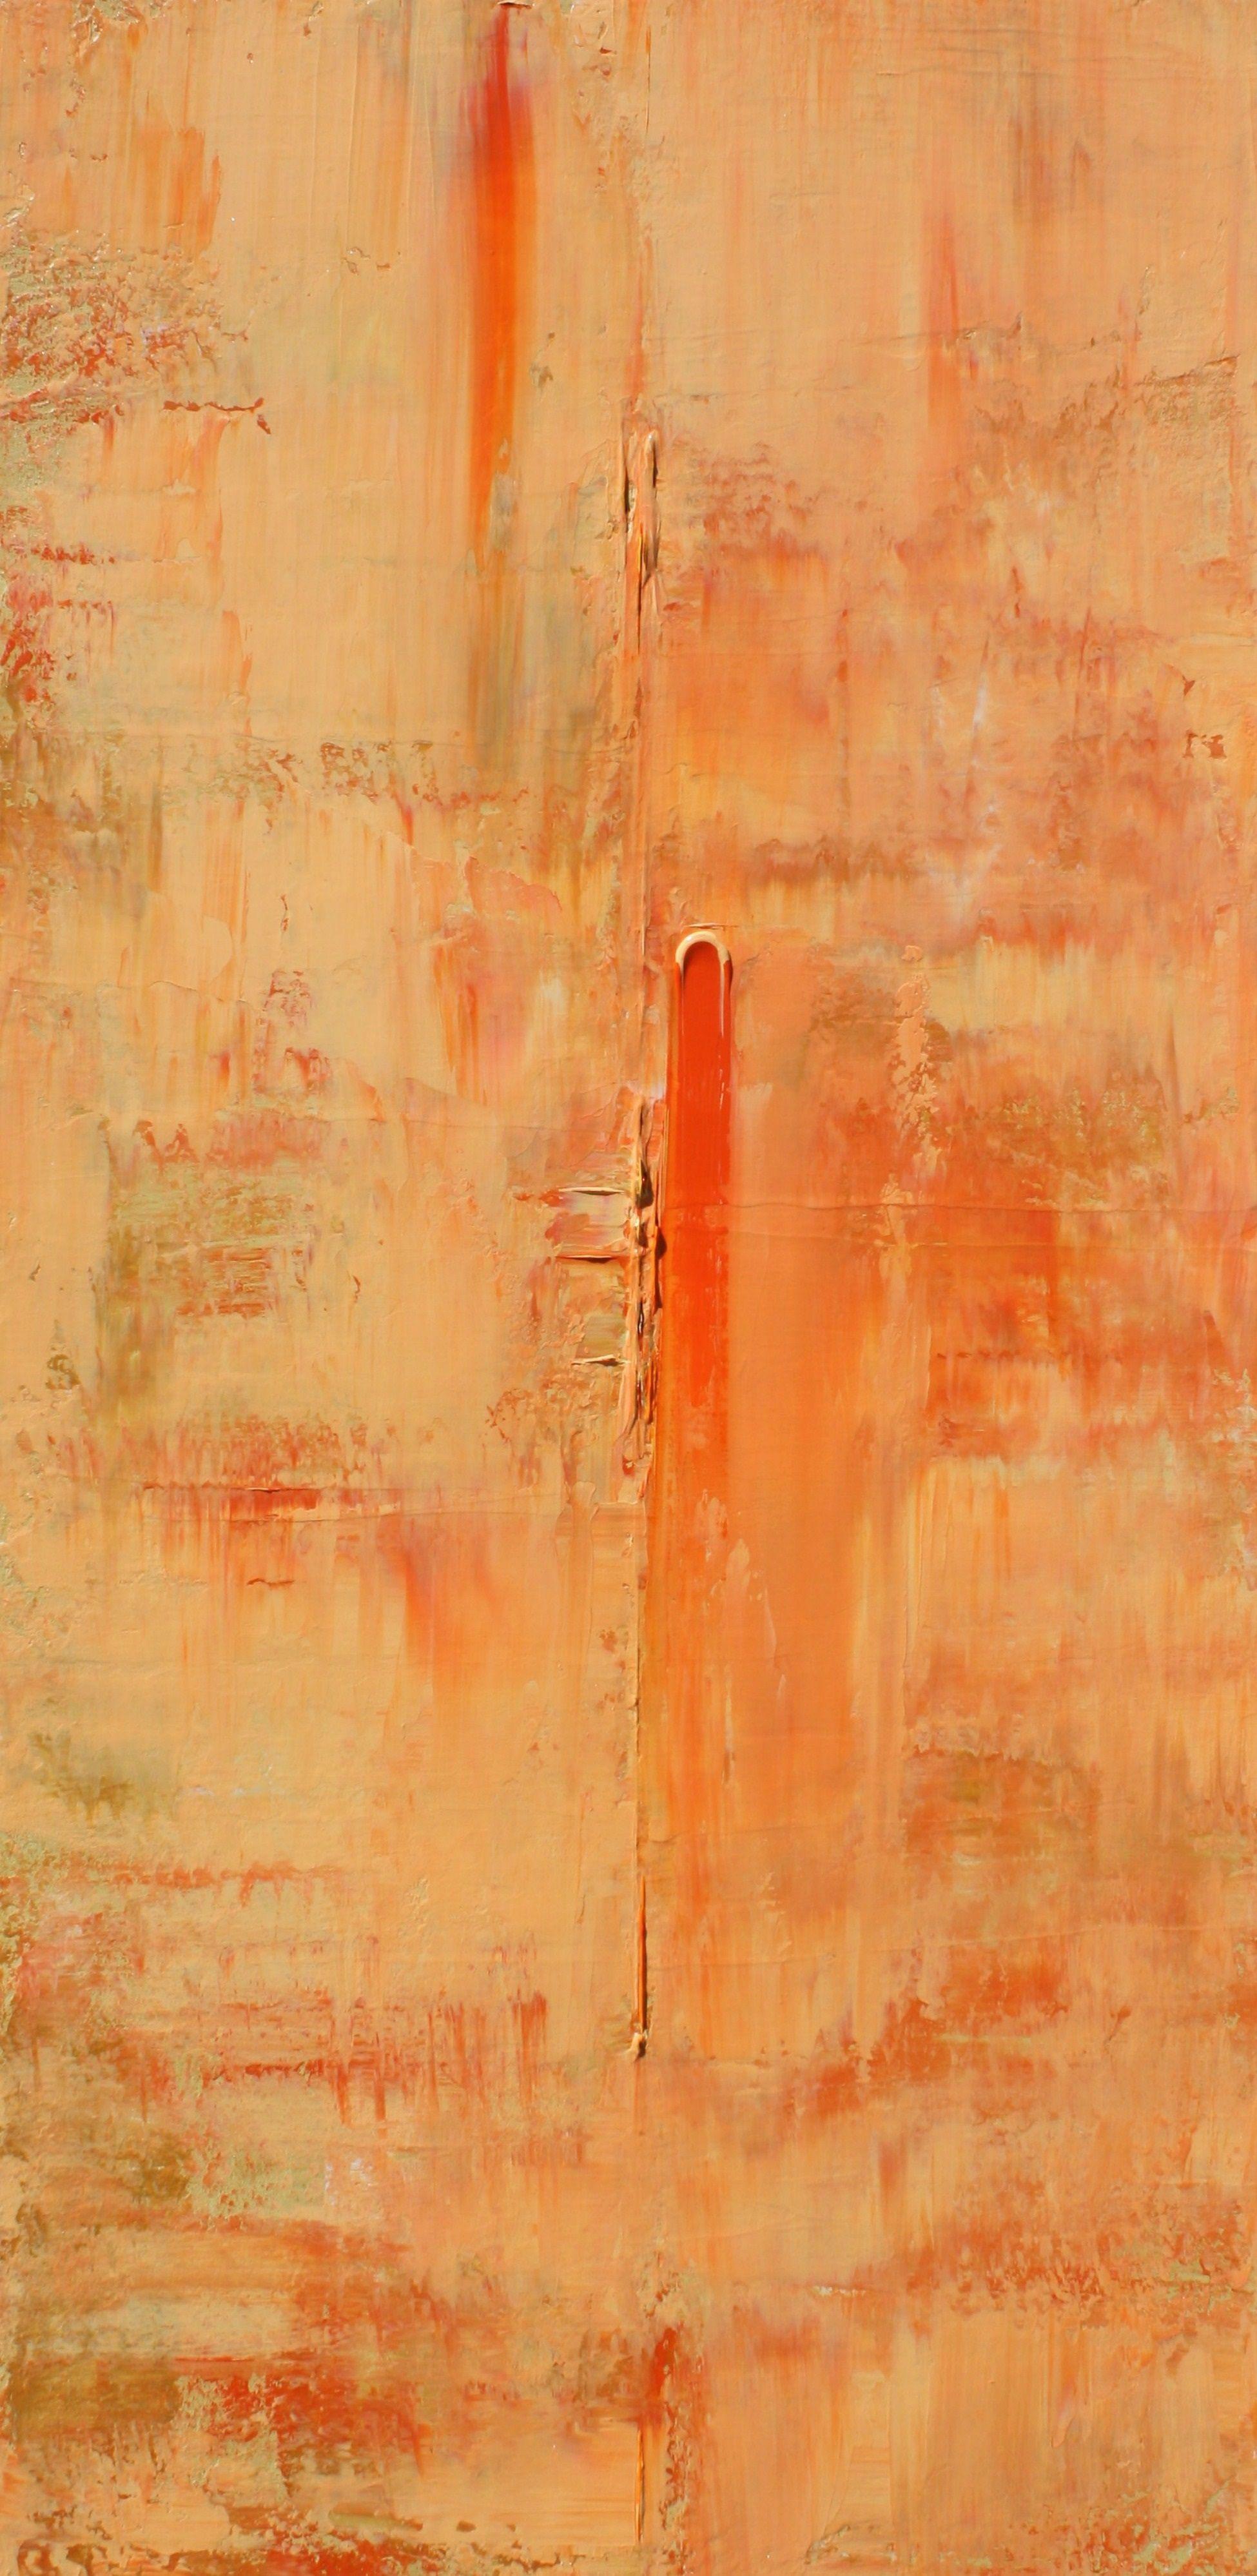 Robert Lynn Abstract Painting - Muted Peach Orange Concept 1, Painting, Acrylic on Canvas